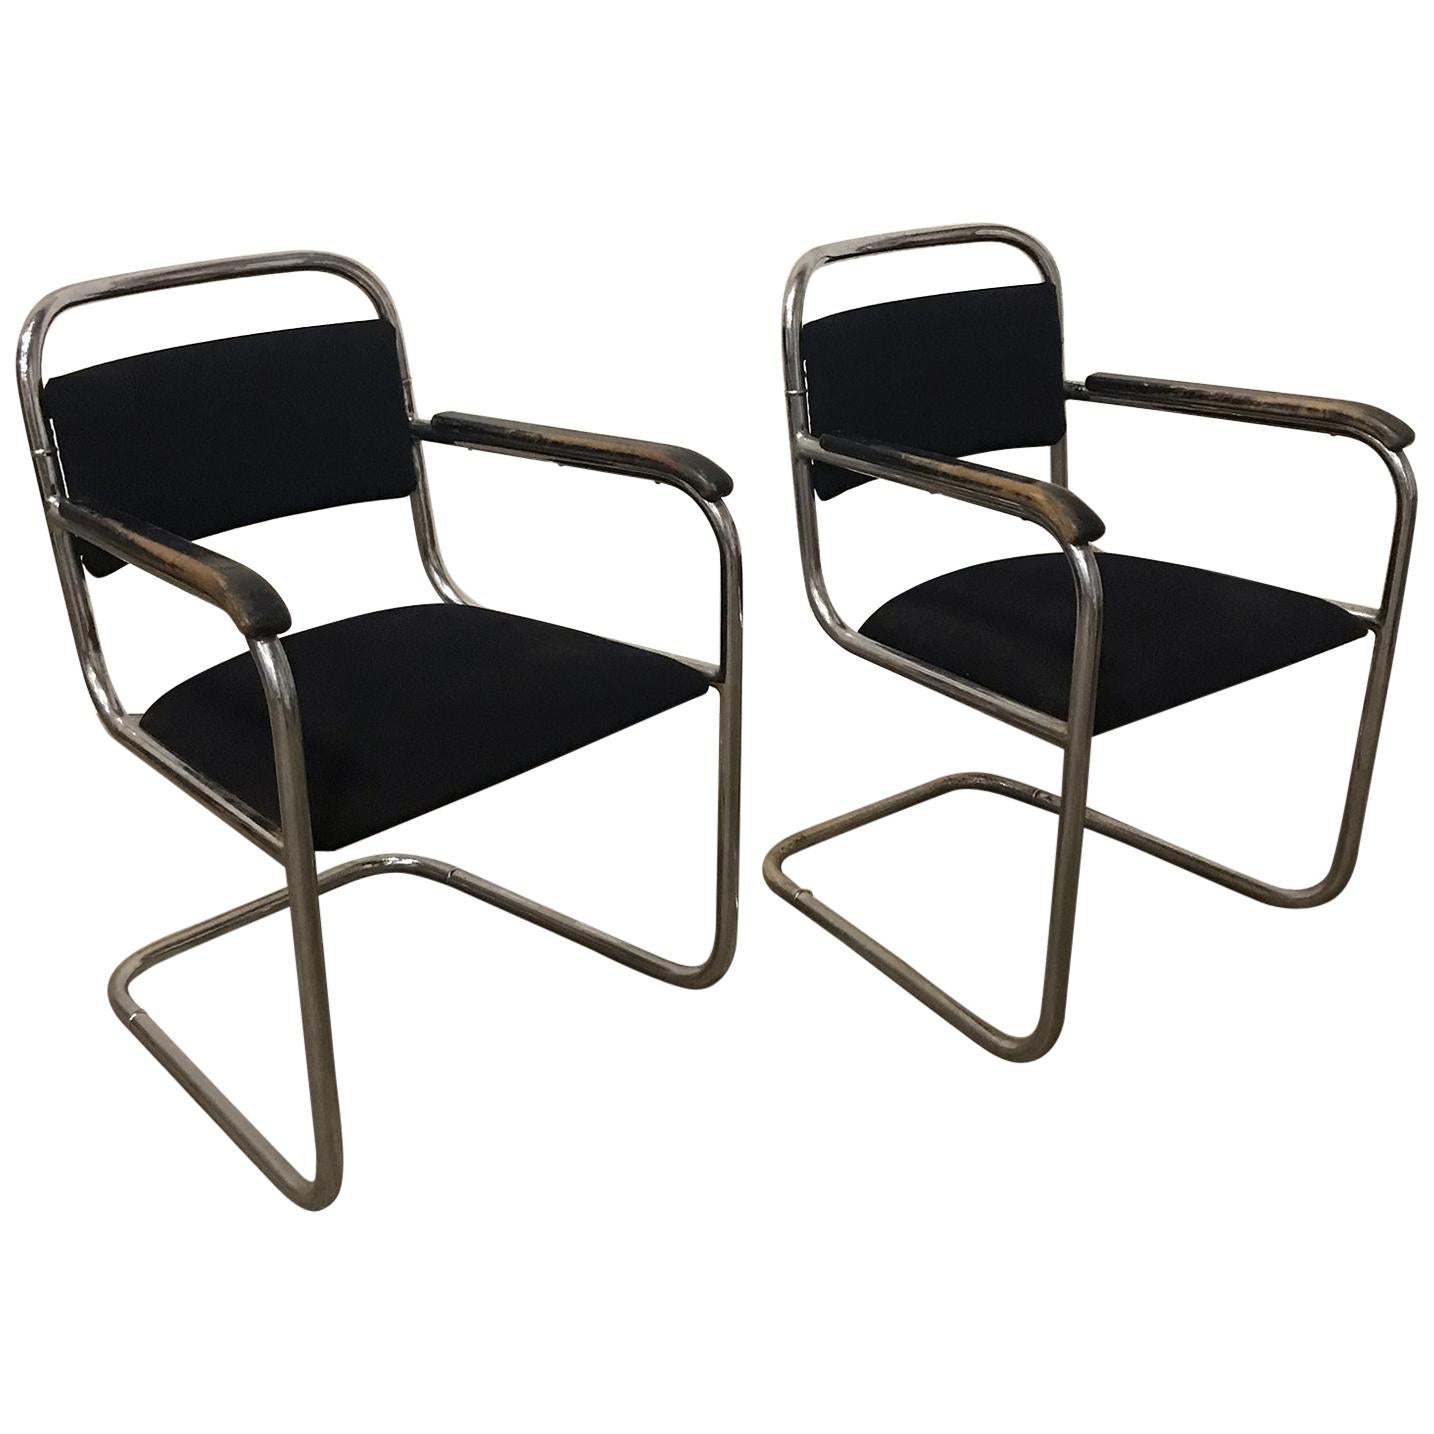 Dutch Design, Set of Original Tubular Chairs with Black Upholstery, circa 1930 For Sale